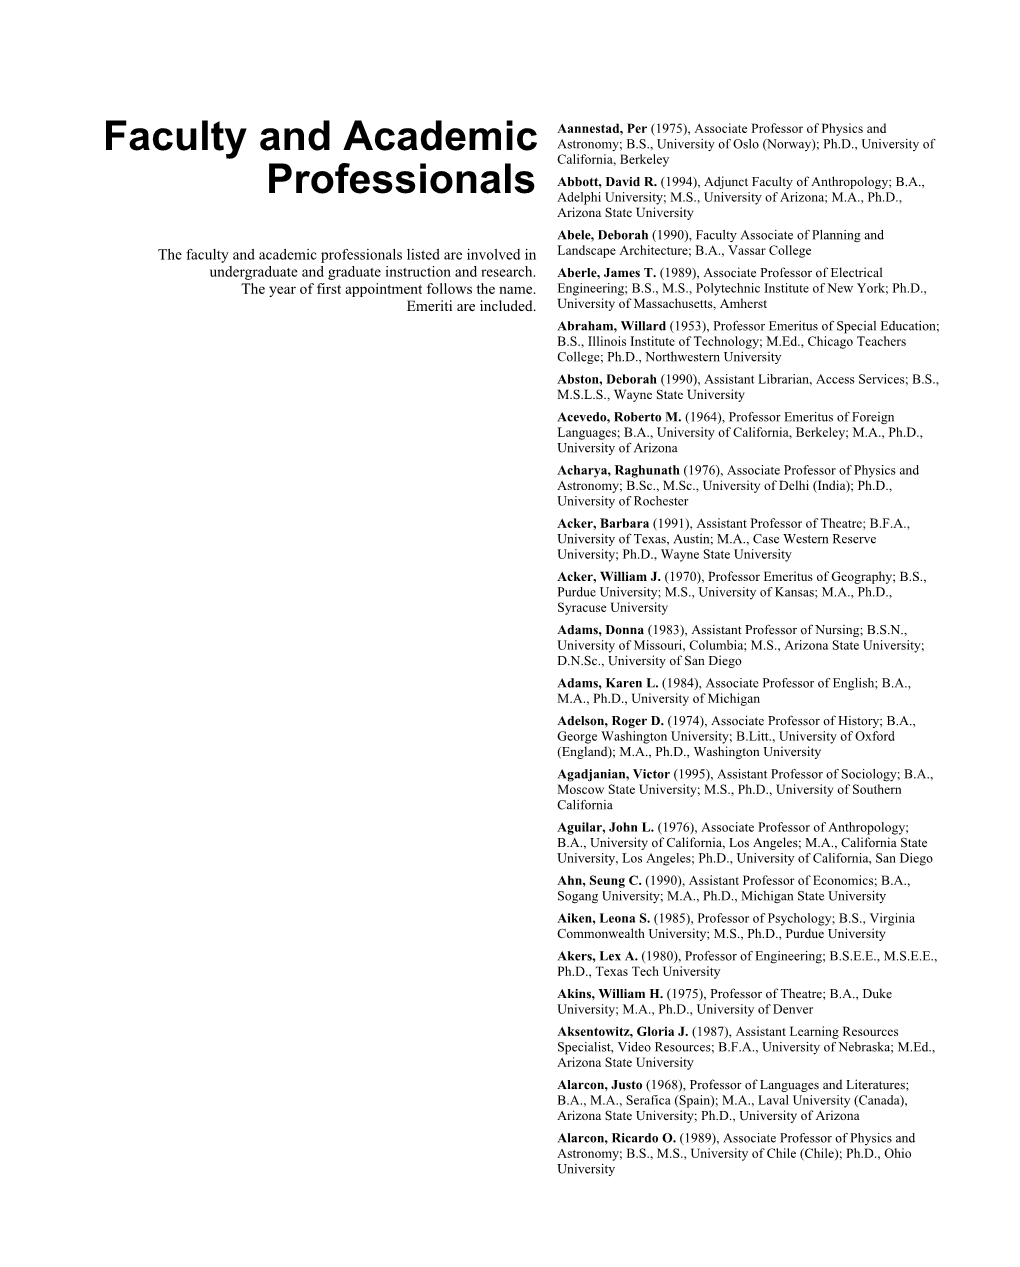 Faculty and Academic Professionals Listed Are Involved in Landscape Architecture; B.A., Vassar College Undergraduate and Graduate Instruction and Research